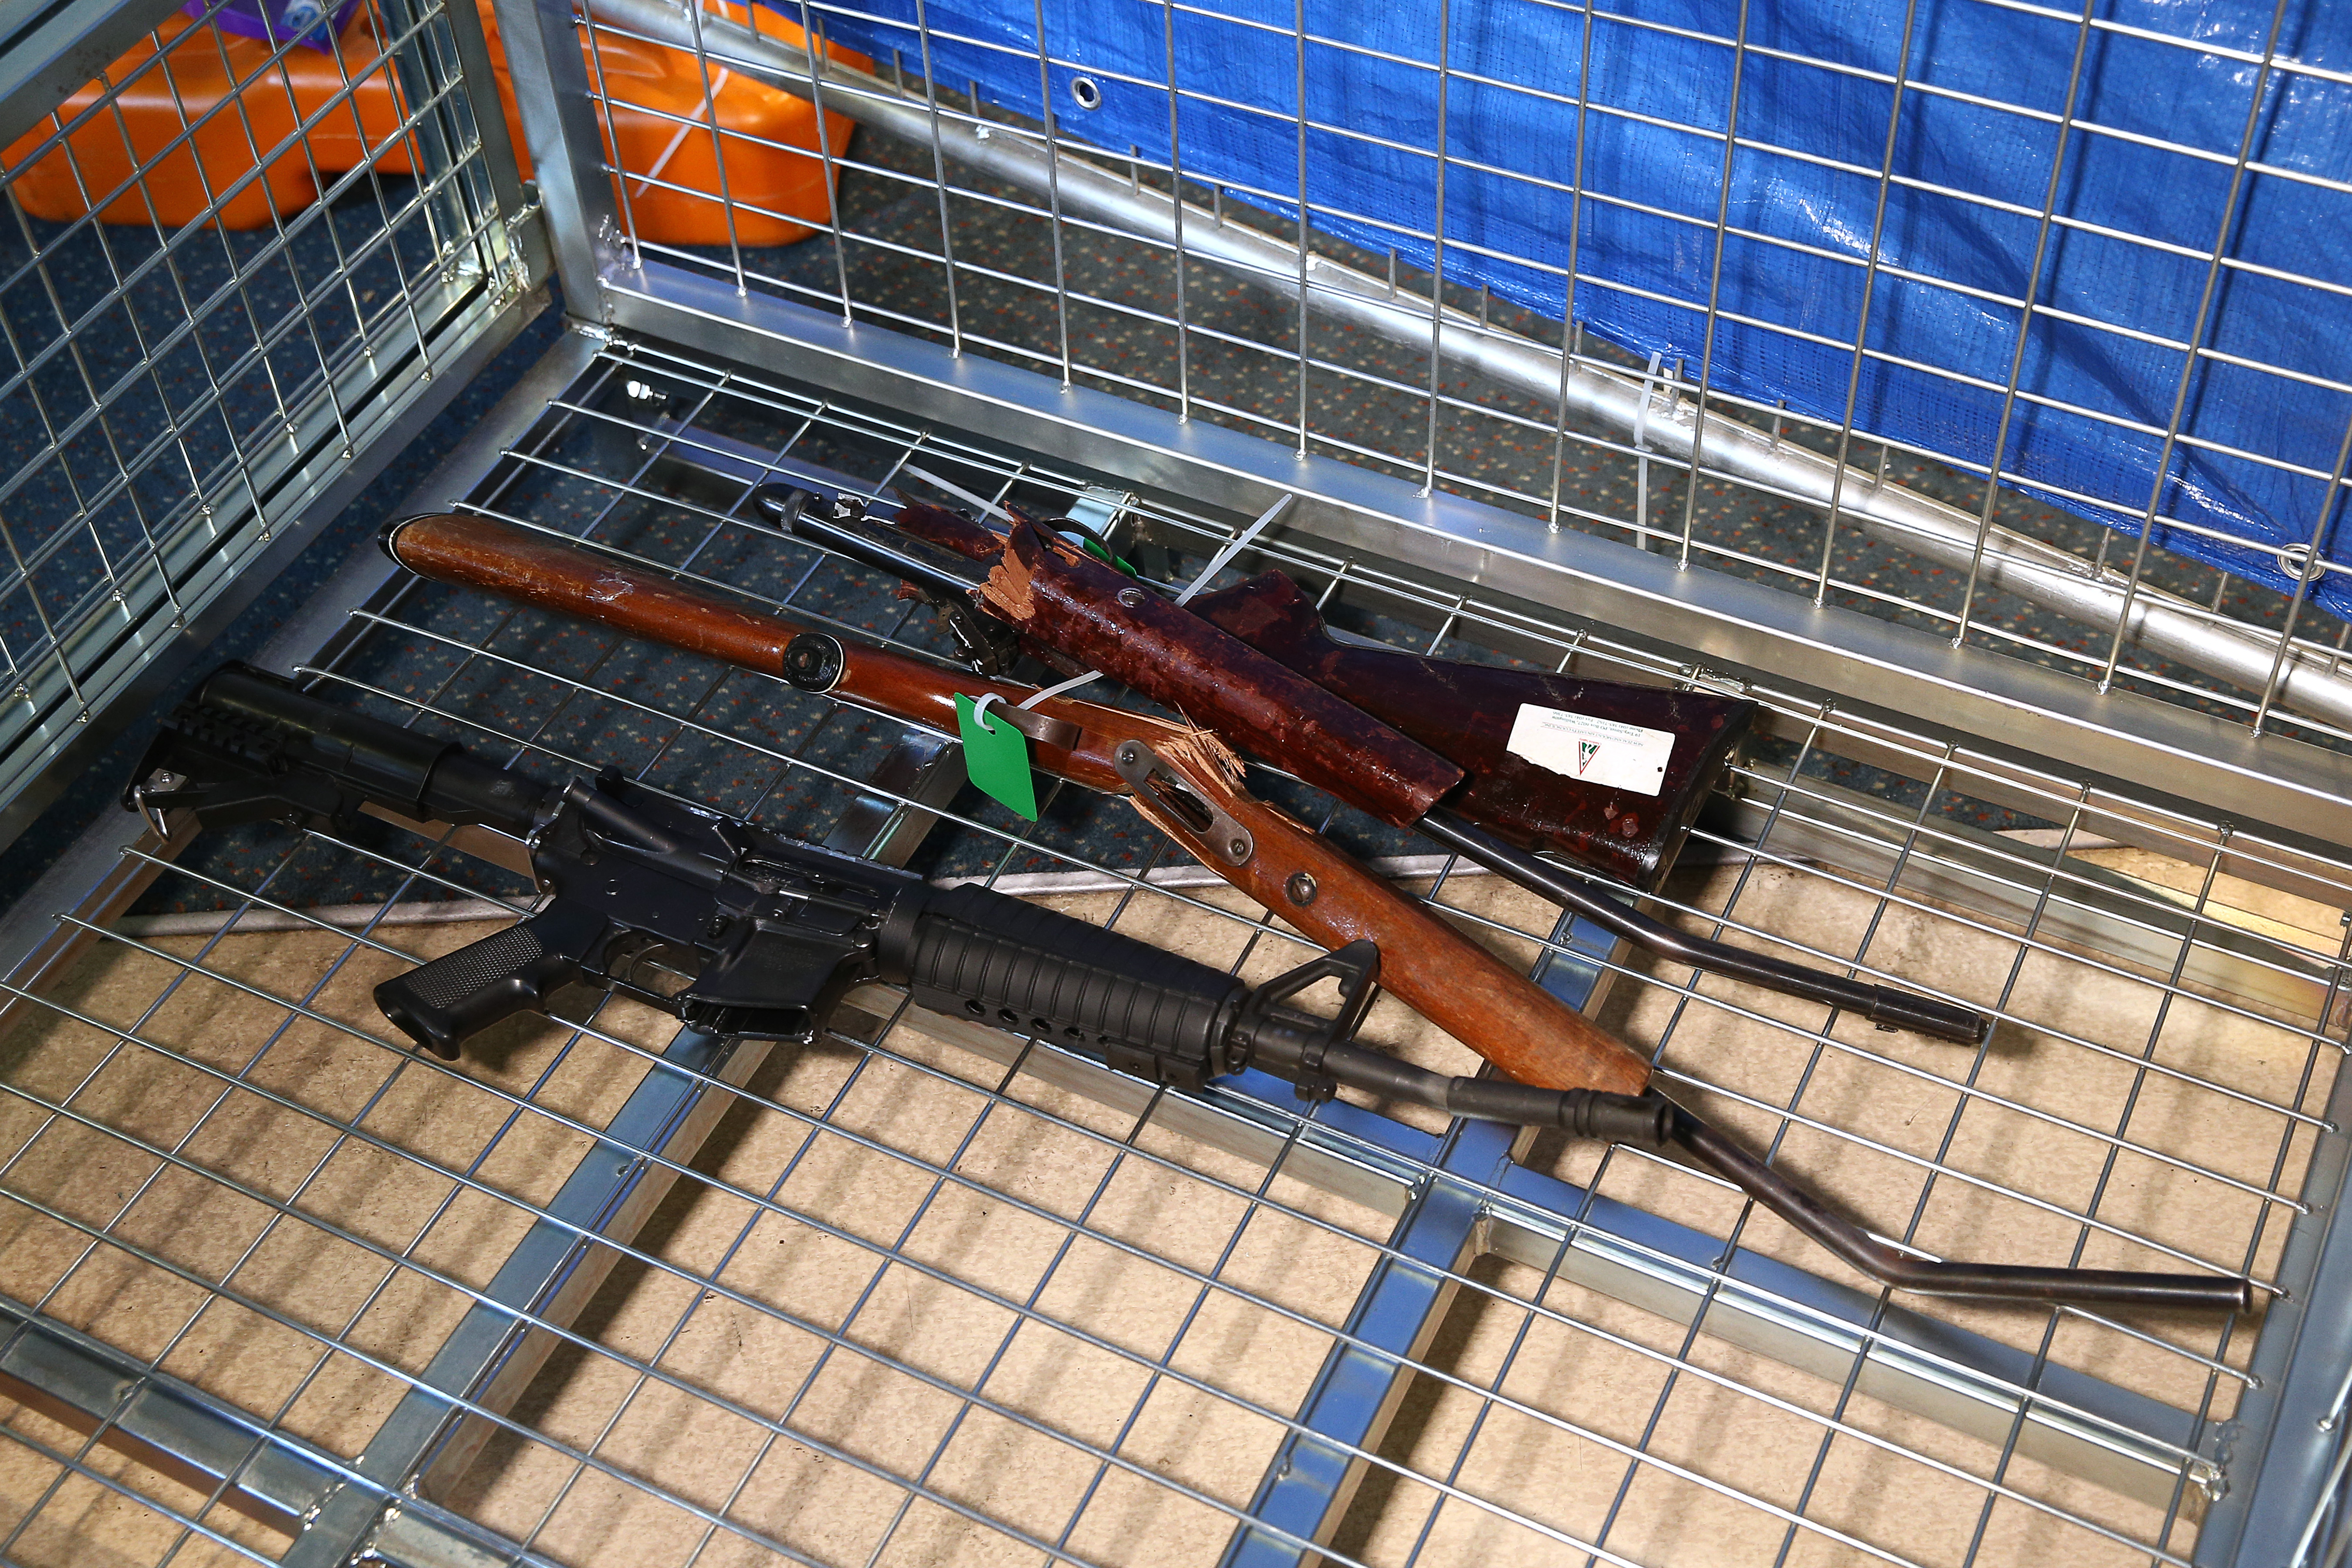 Guns lie in a container during a firearm buy-back collection event on July 04, 2019 in Wellington, New Zealand. New Zealand gun owners will be able to hand in their guns around the country during the buy back and amnesty period starting from 13 July. The NZ Government will pay owners between 25 per cent and 95 per cent of a set base price, depending on condition. It will also compensate dealers and pay for some weapons to be modified to make them legal. The amnesty ends on December 20. (Photo by Hagen Hopkins/Getty Images)